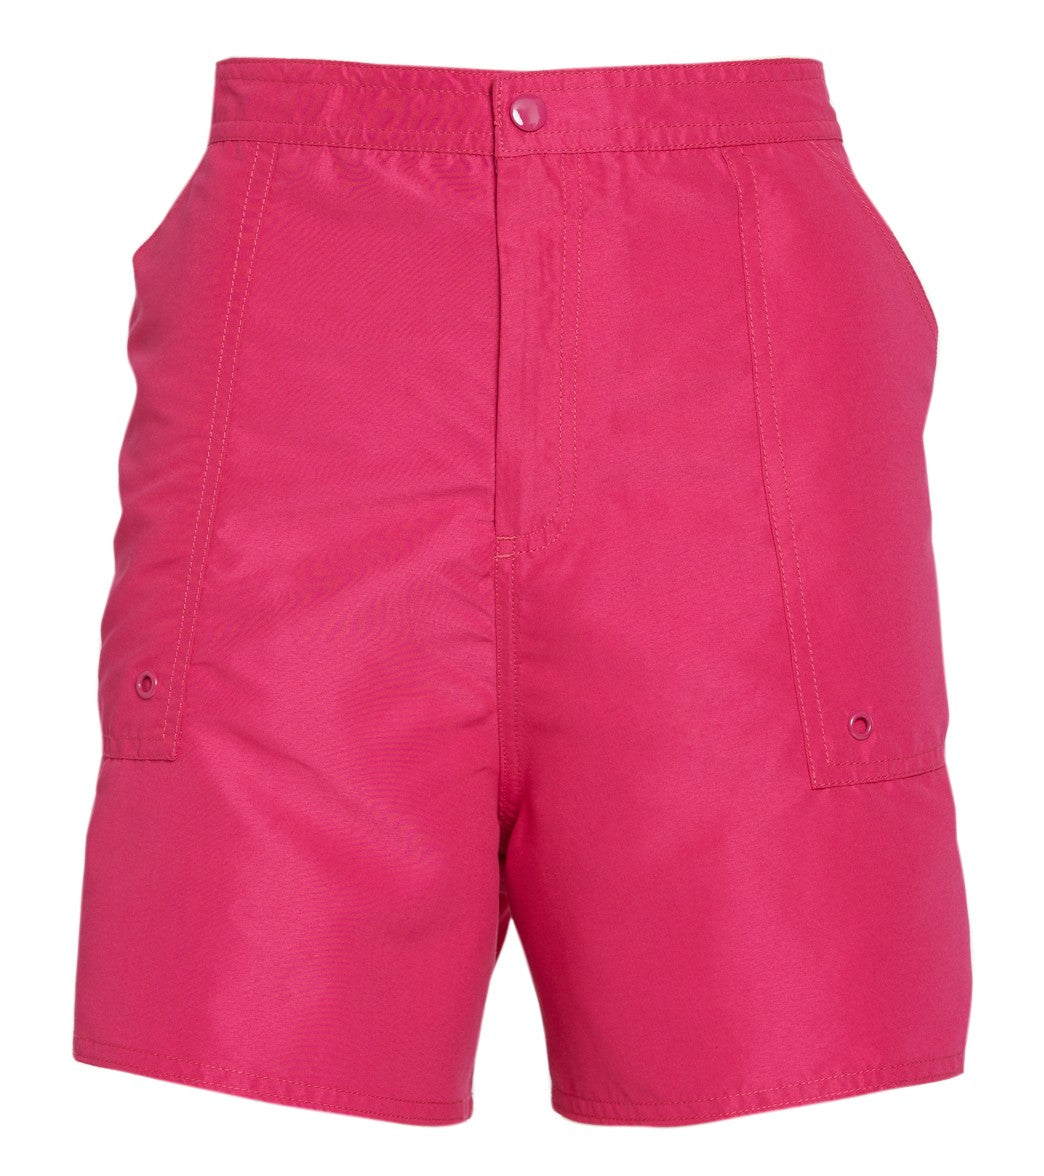 Maxine Plus Size Solids Woven Board Shorts